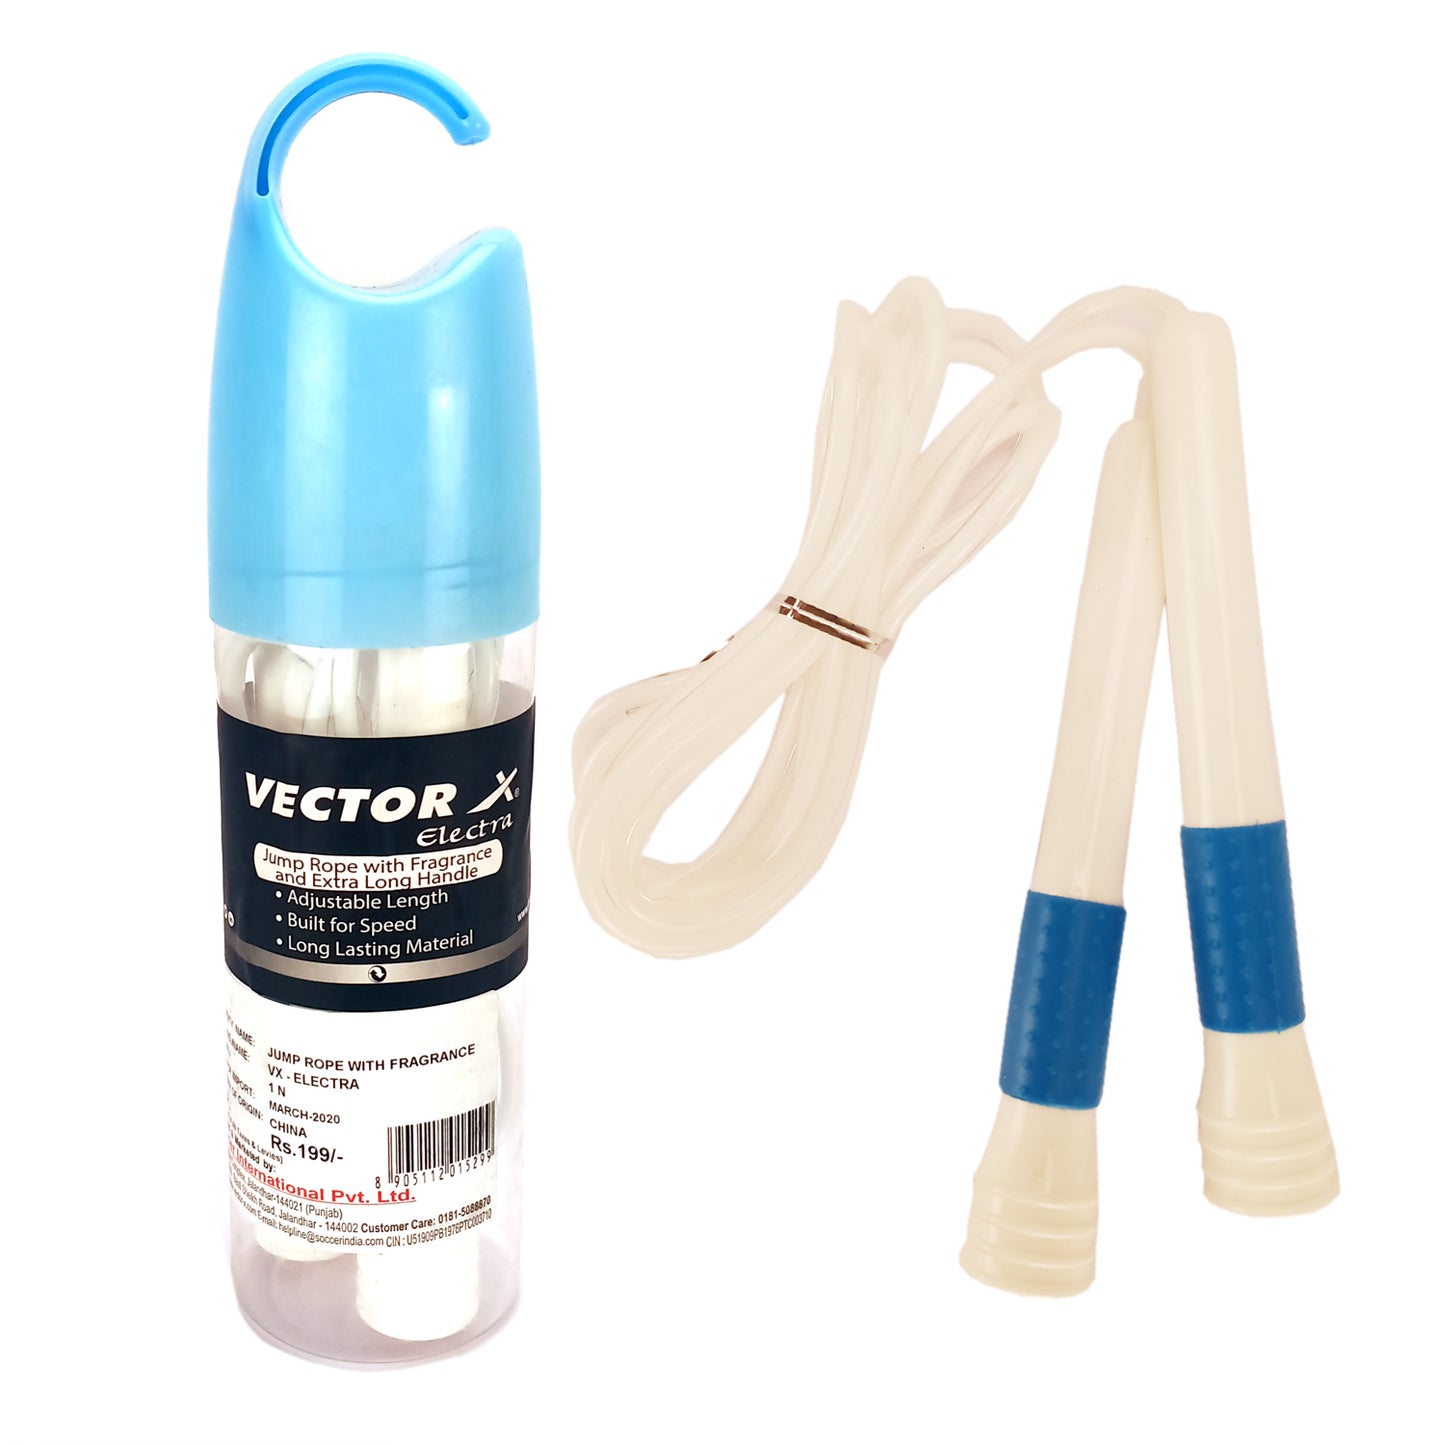 Vector X VX-Electra Jump Rope With Fragrance (color may very) - Best Price online Prokicksports.com